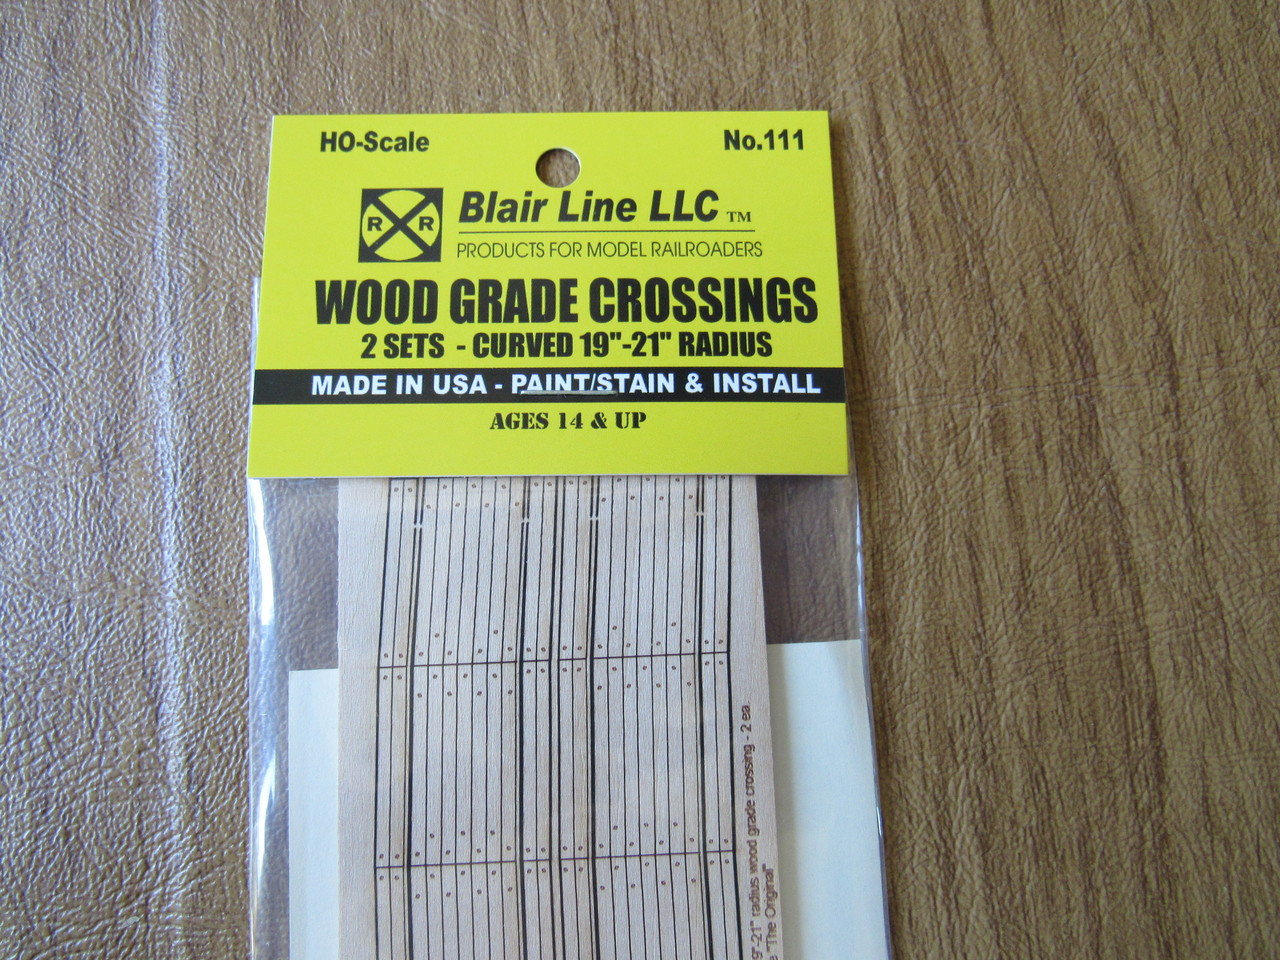 Details about   Blair Line HO #111 Curved Wood Grade Crossings 2 sets 21" Radius NEW 19" 